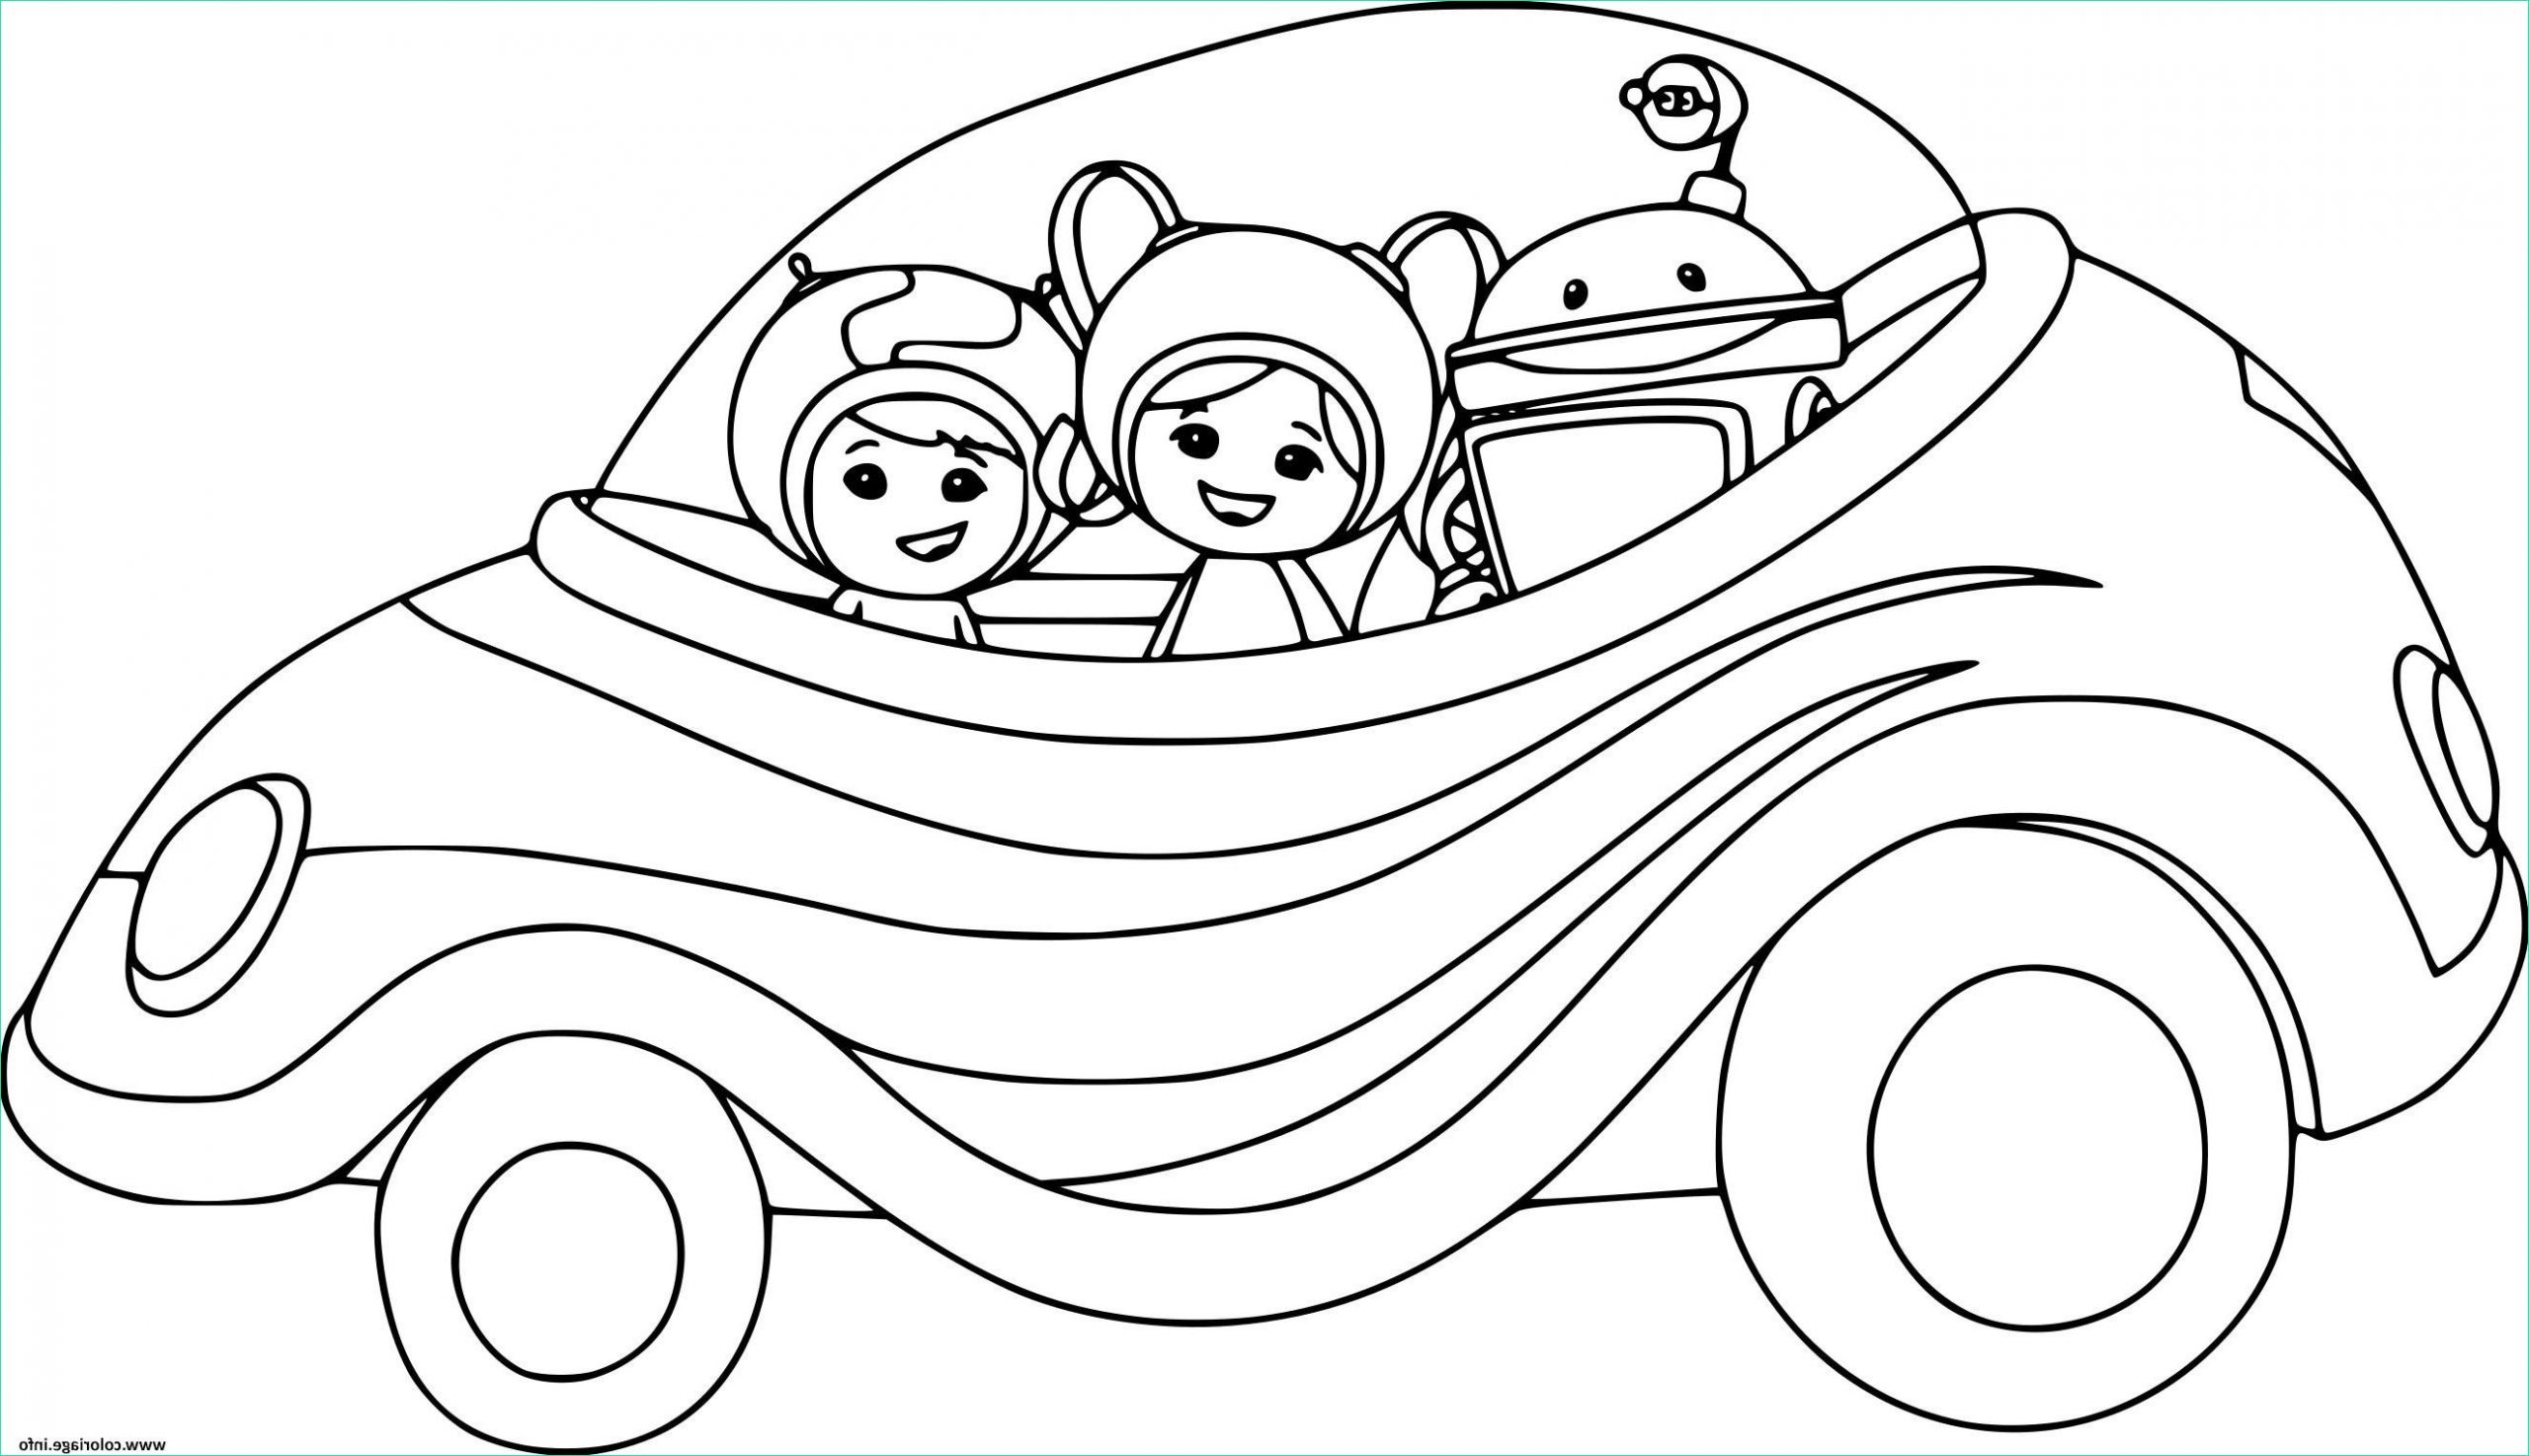 Coloriage Umizoomi Luxe Photographie Coloriage Umizoomi En Voiture Dessin